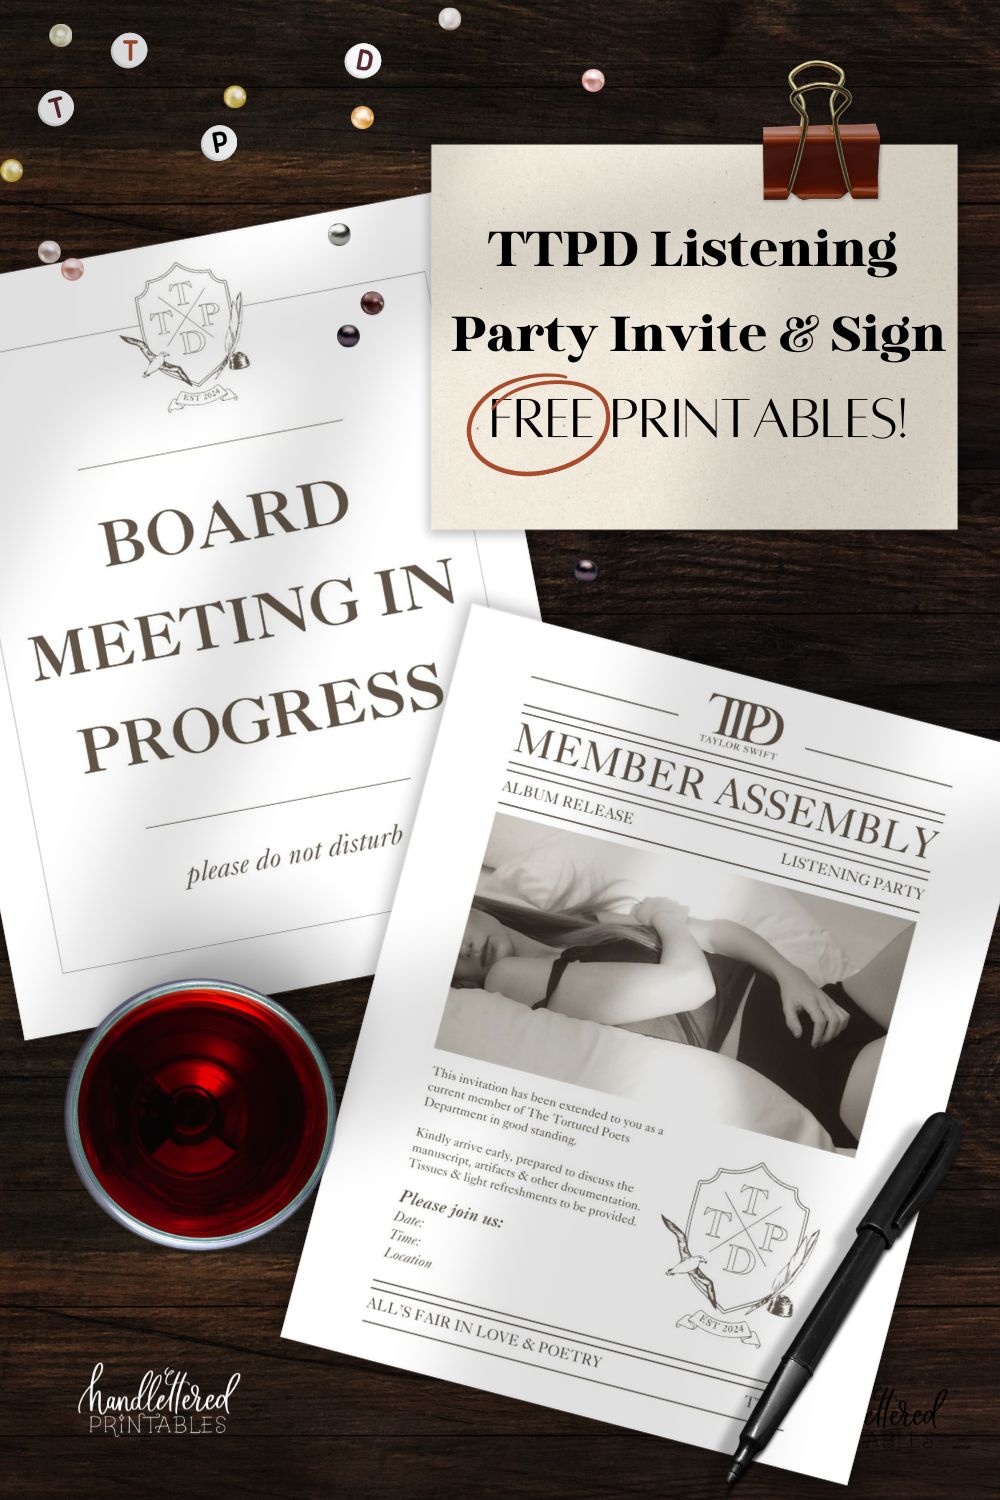 image of TTPD Listening Party Invitation and Signage on a dark wood table with friendship bracelet beads, glass of red wine and pen. note card with binder clip reads: TTPD Listening Invitation and Sign Free Printables